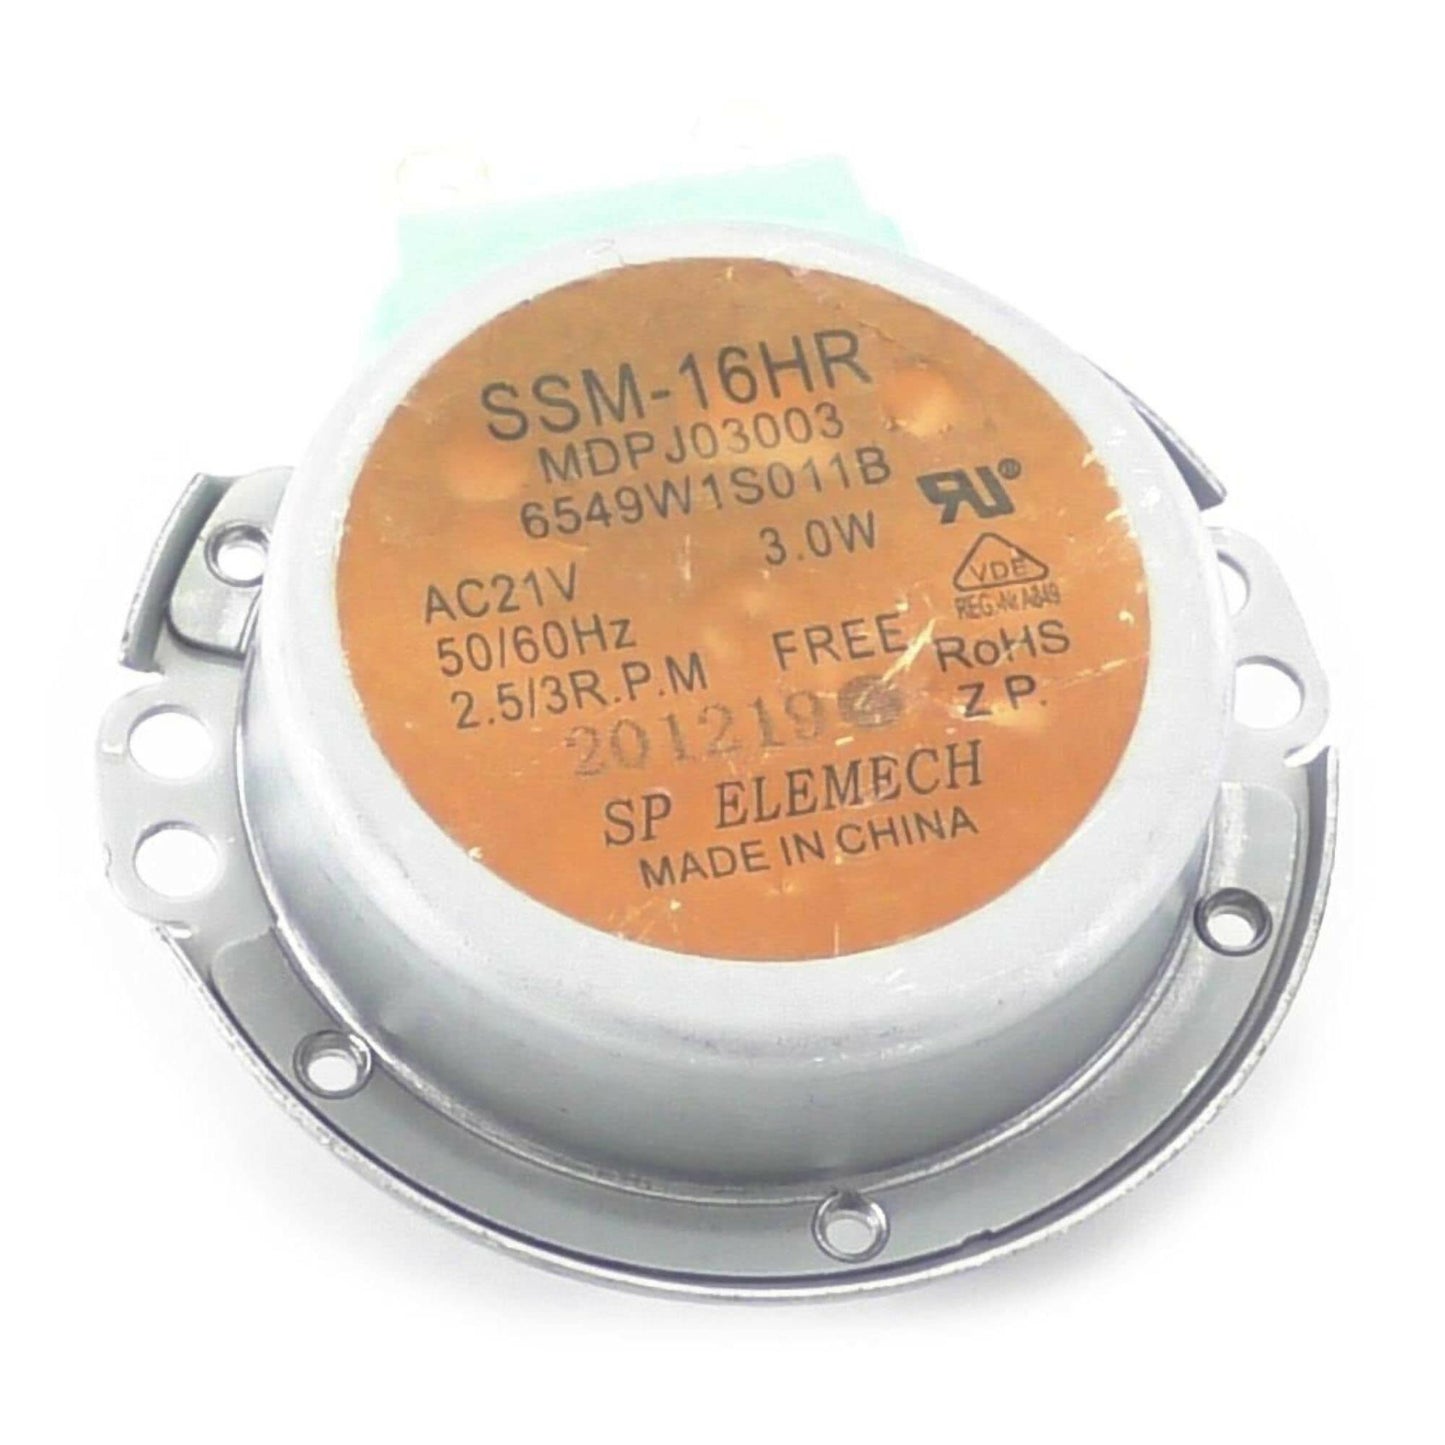 LG Microwave Turntable Motor, AC Synchronous - 6549W1S011B, Replaces: 6549W1S002B 6549W1S011A 6549W1S011C 6549W1S017A 6549W1S021B SSM-16HR OEM PARTS WORLD